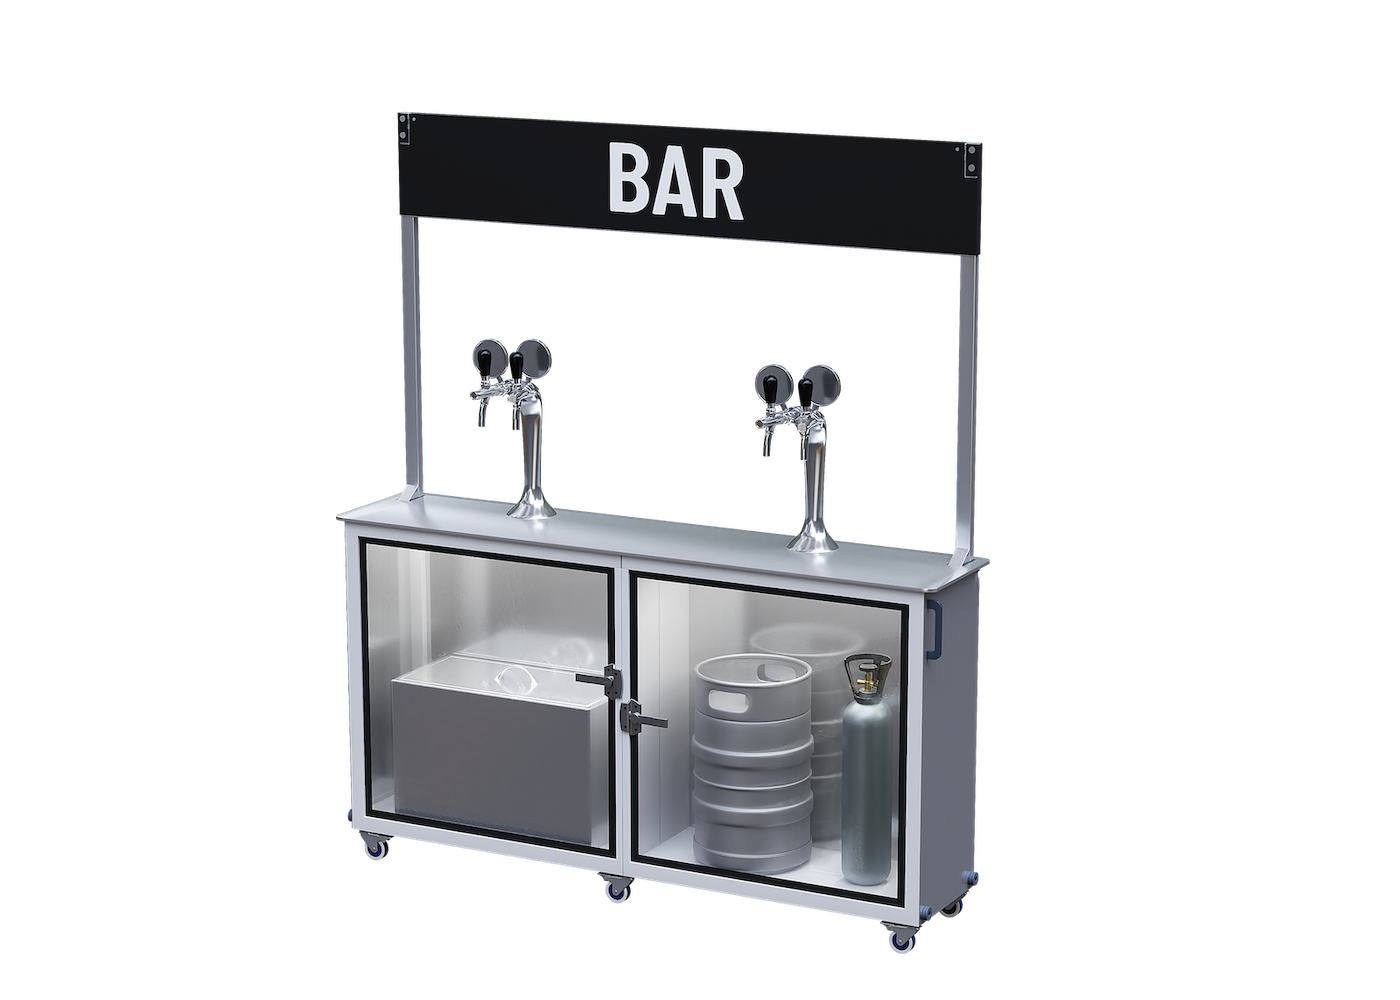 Slimline beer station unpowered (ice-cooled) at an angle